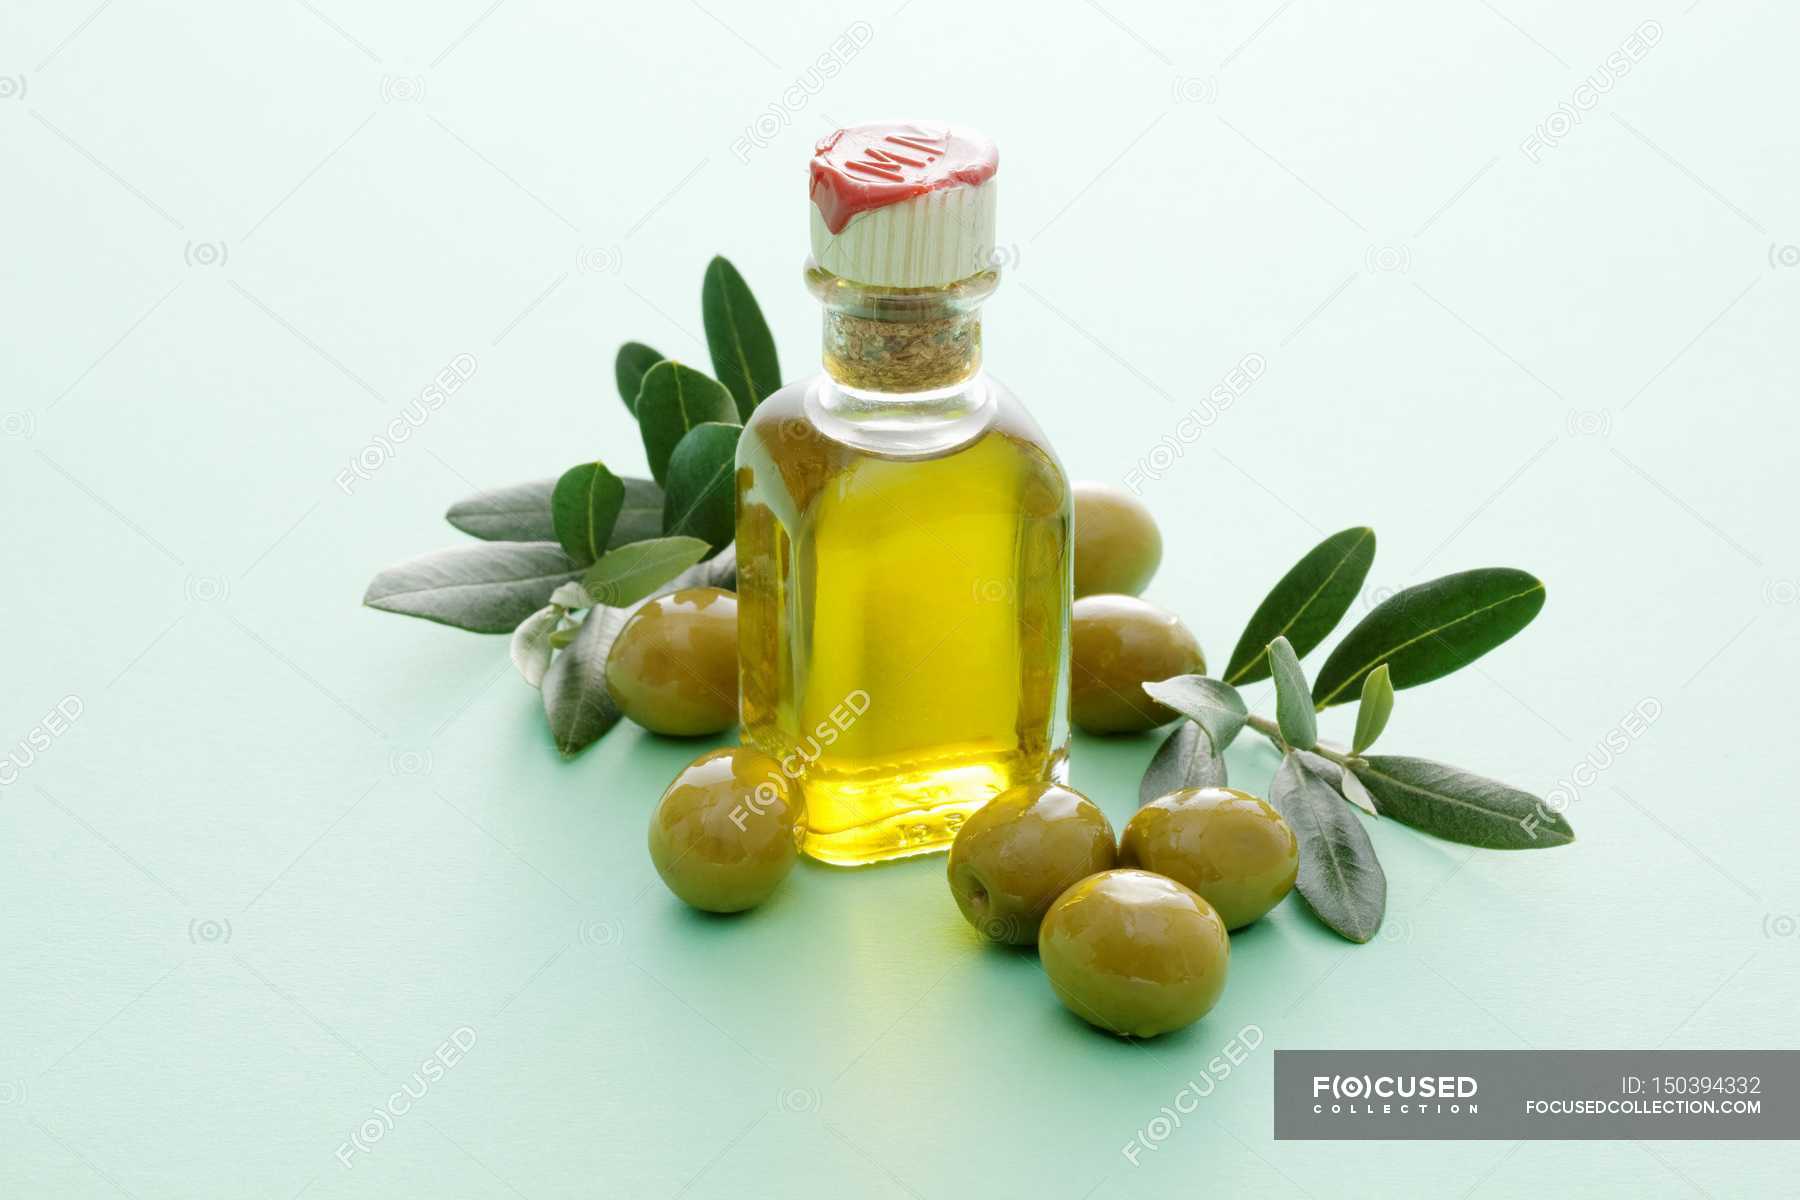 A bottle of olive oil. Масло оливы. Оливковое масло. Бутылка оливкового масла. Бутылка и оливки.